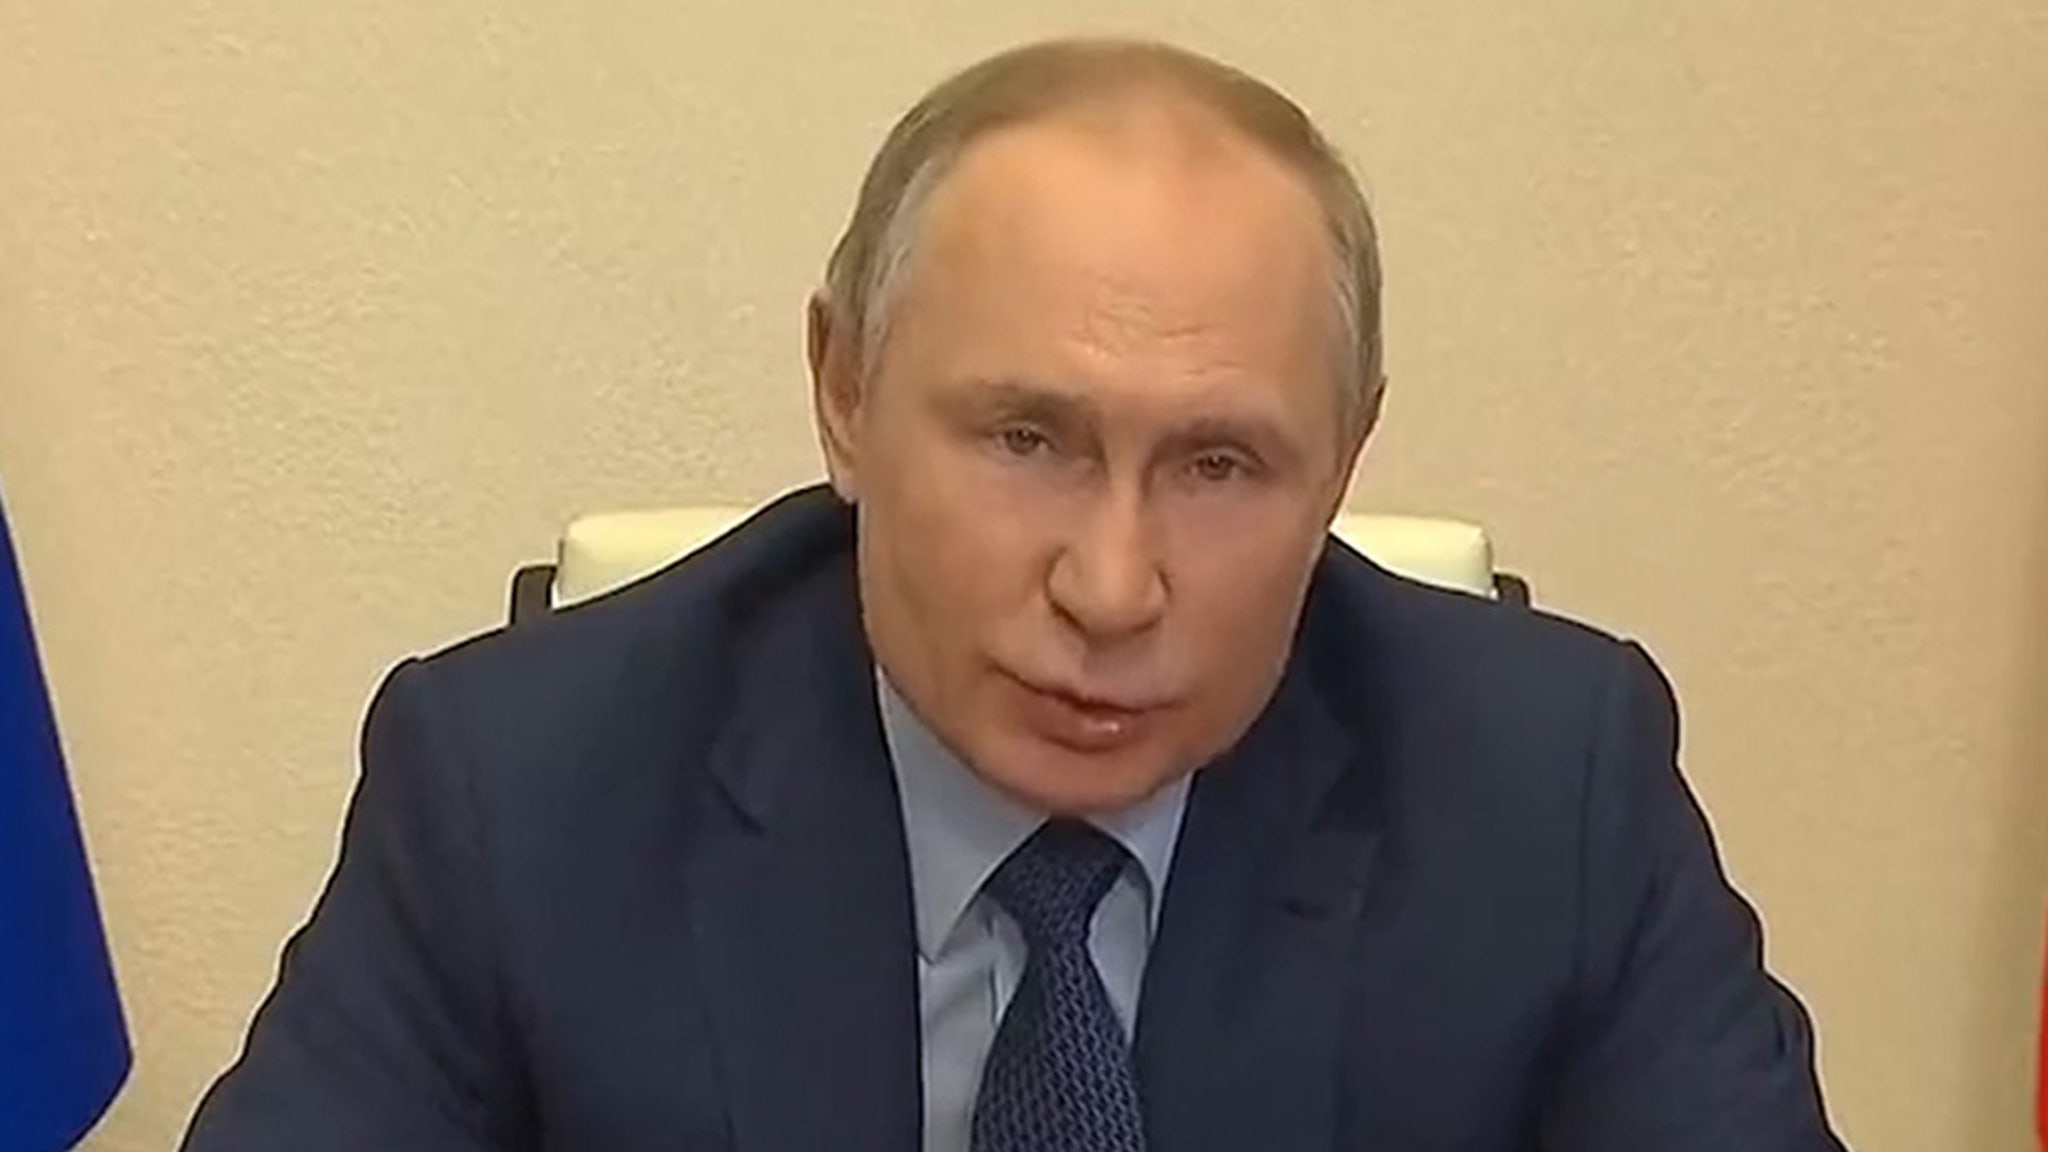 Putin Compares Russia To J.K. Rowling, Condemns Cancel Culture